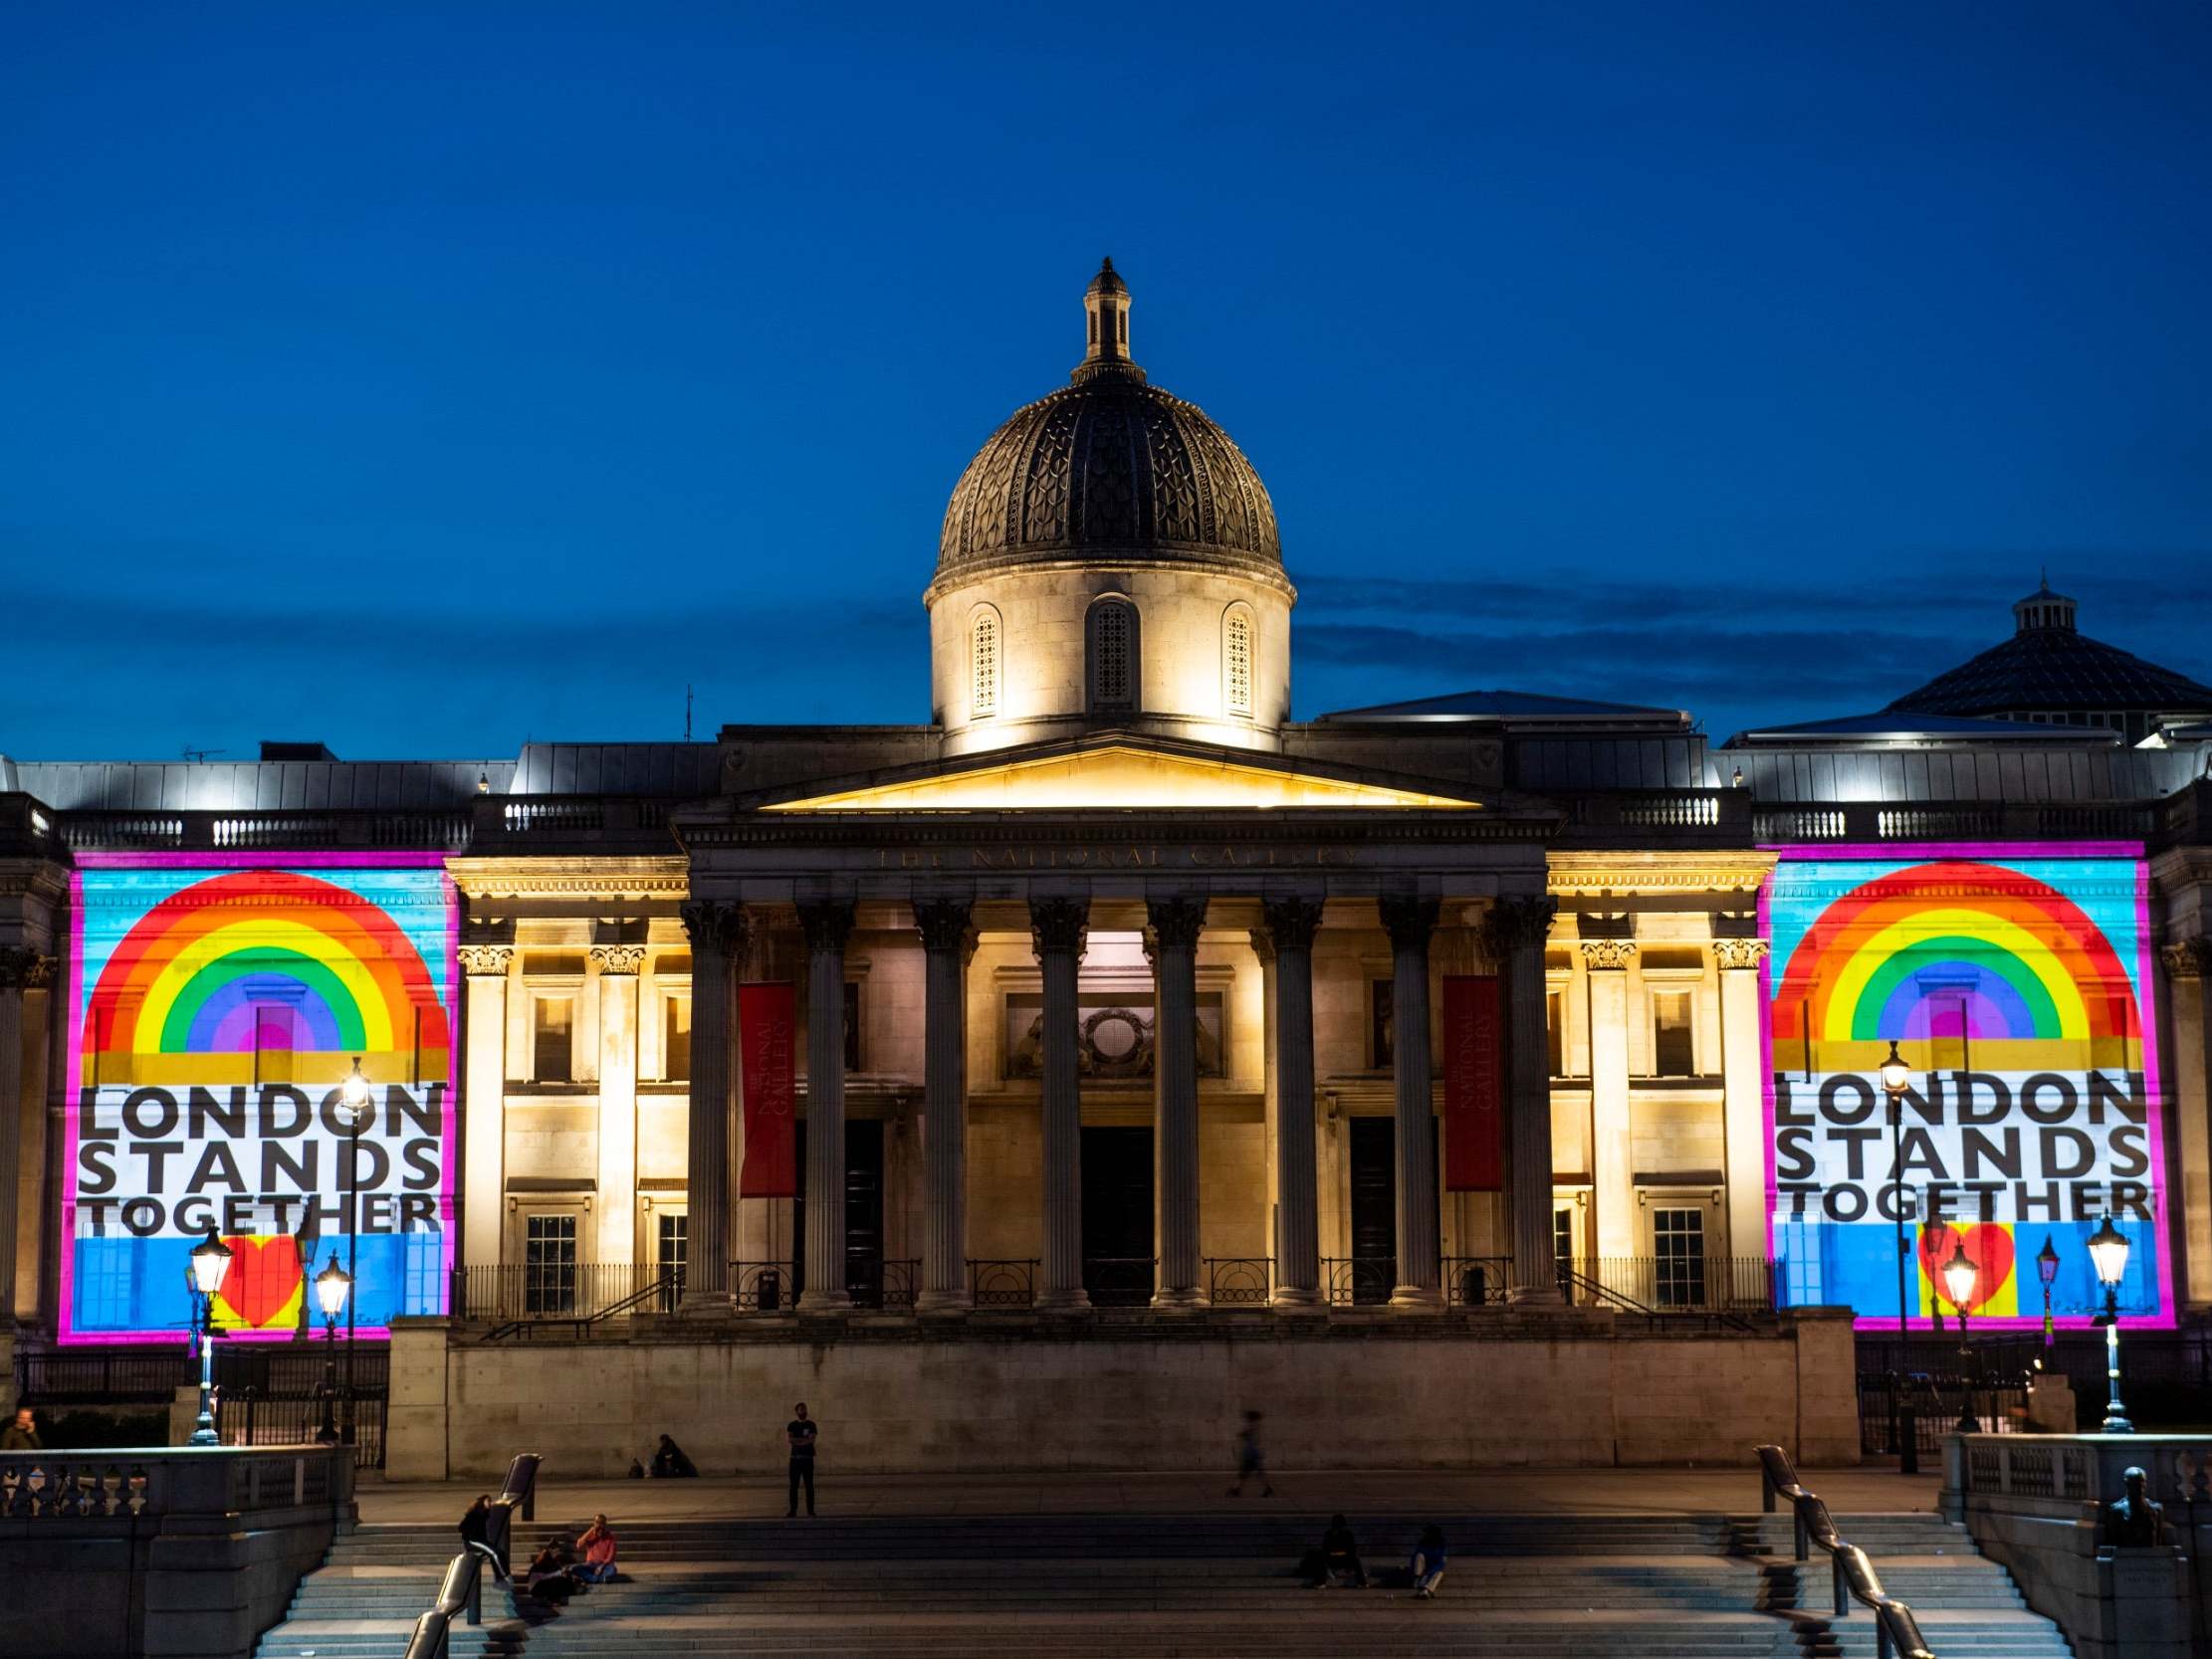 Sir Peter Blake’s artwork projected on to the National Gallery